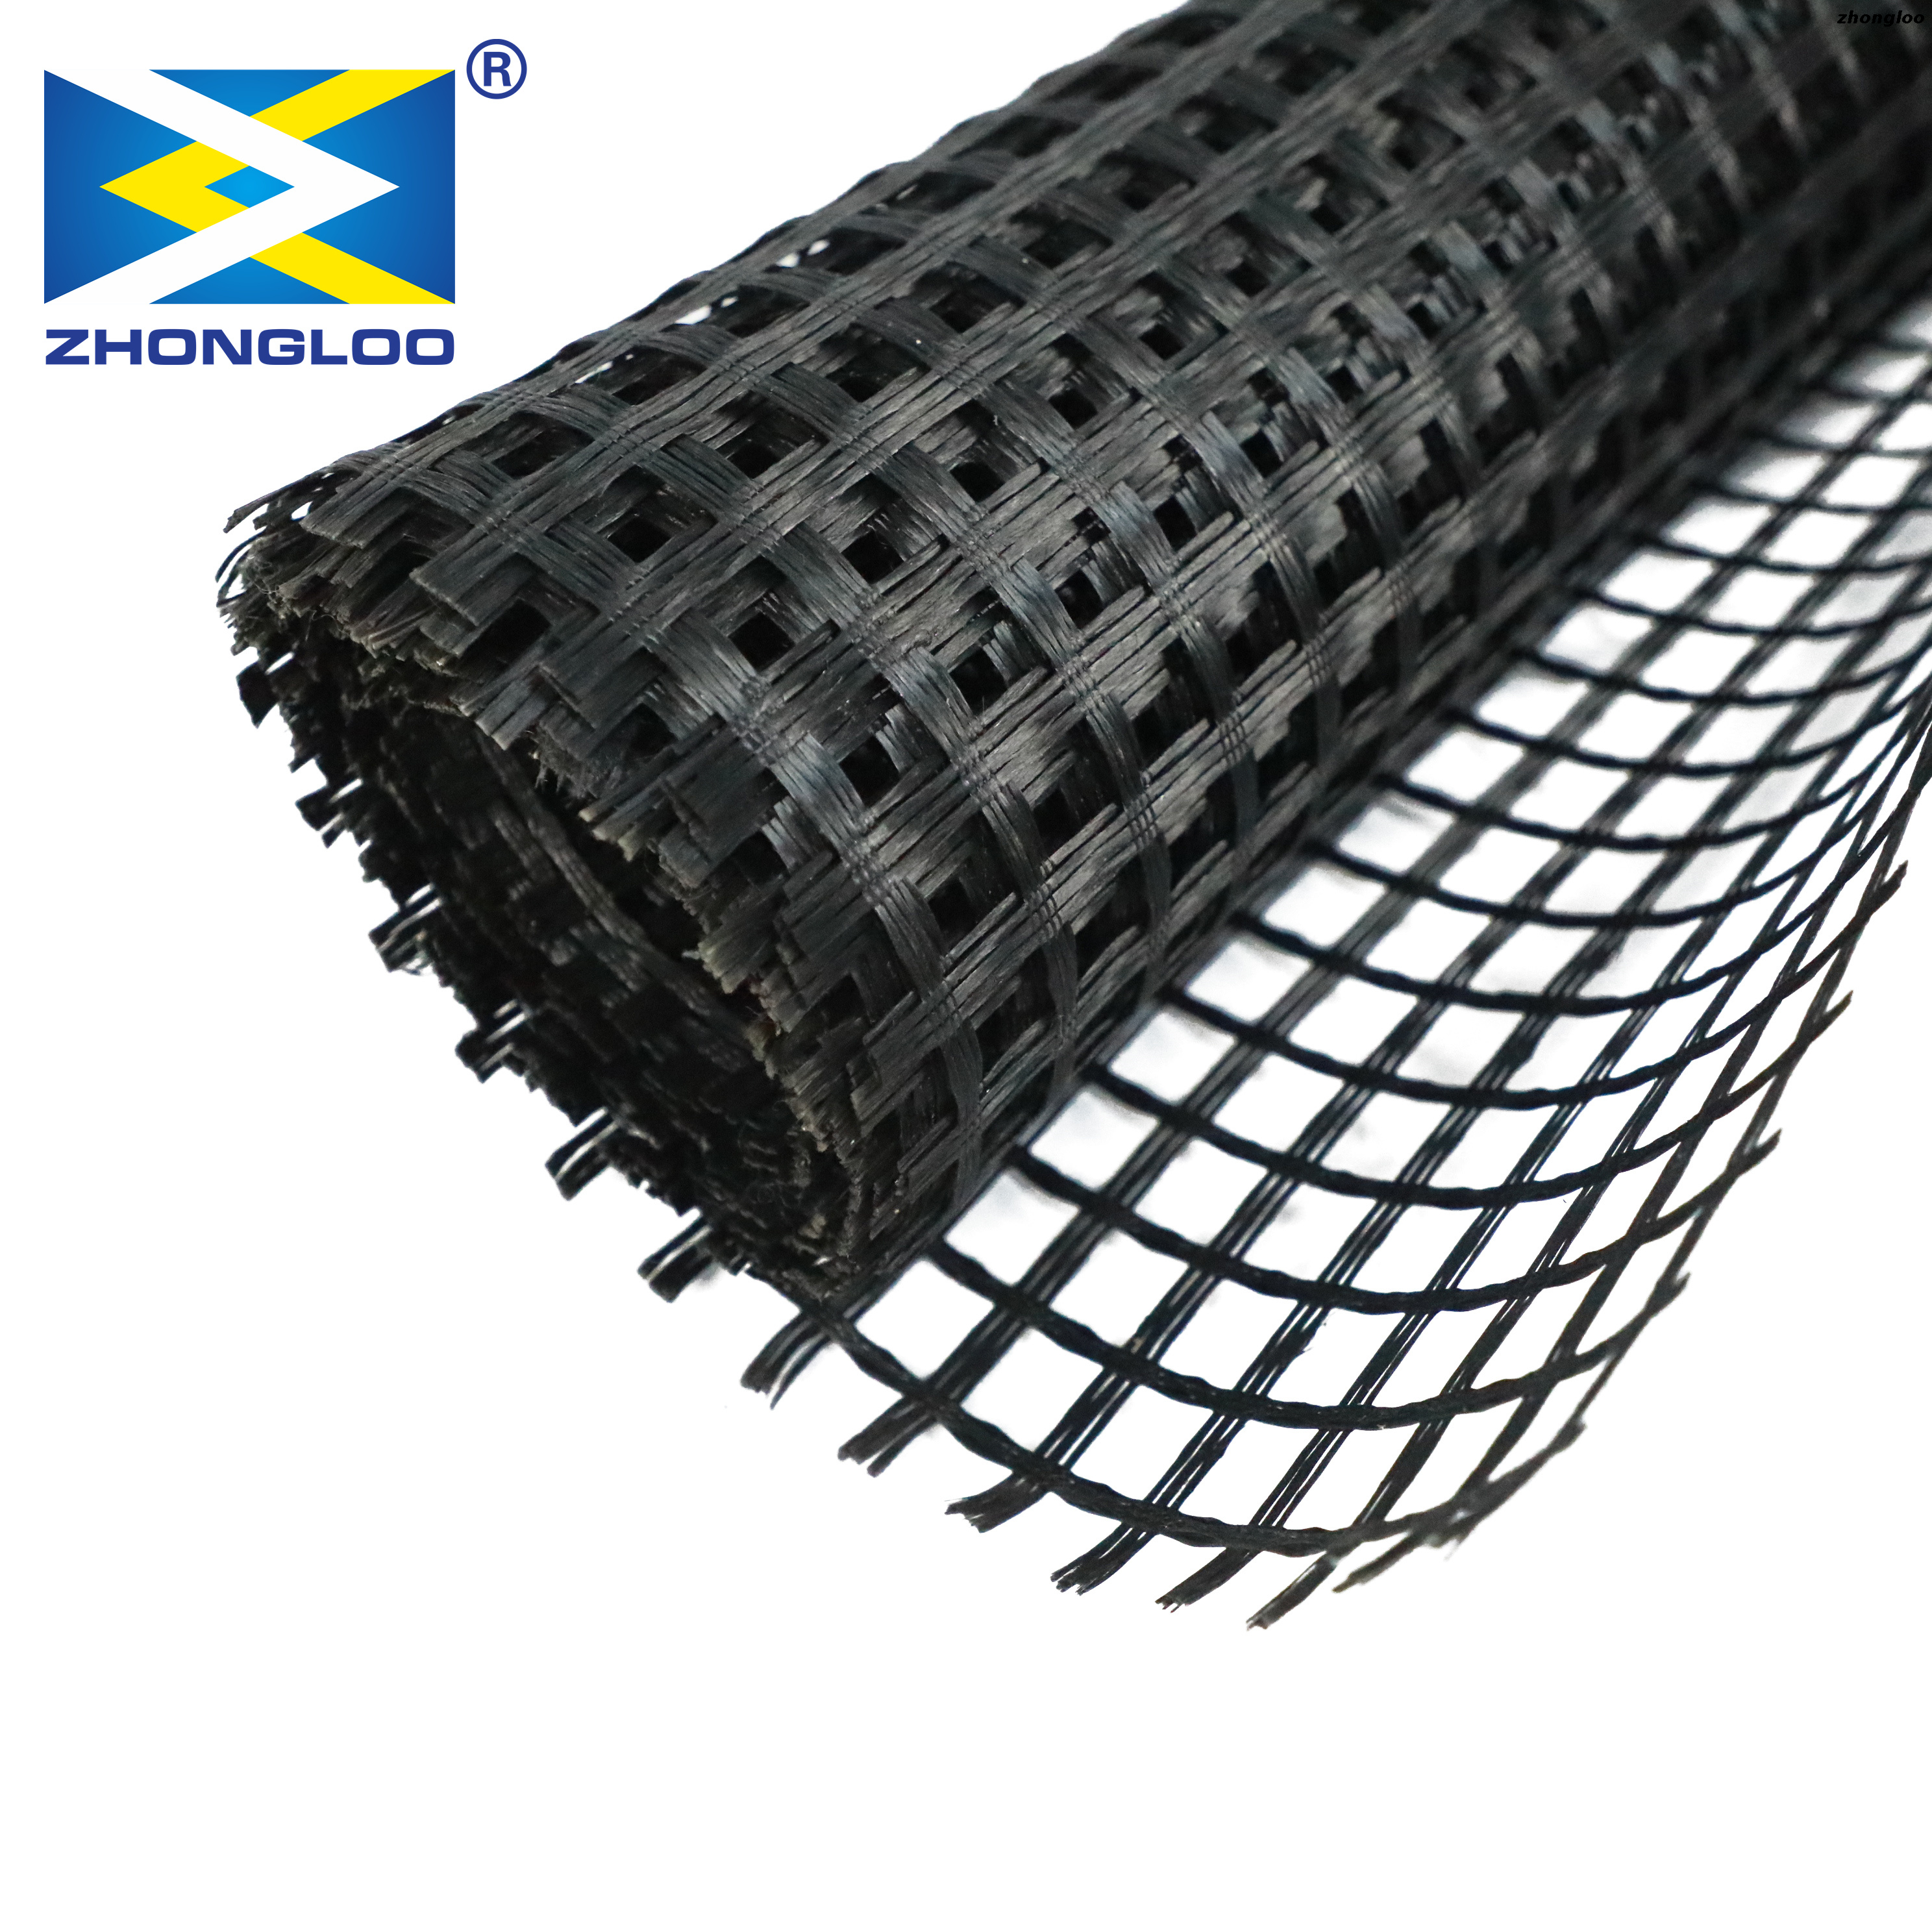 Geogrid Soil Reinforcement Fiberglass Uniaxial Geogrid for Retaining Wall